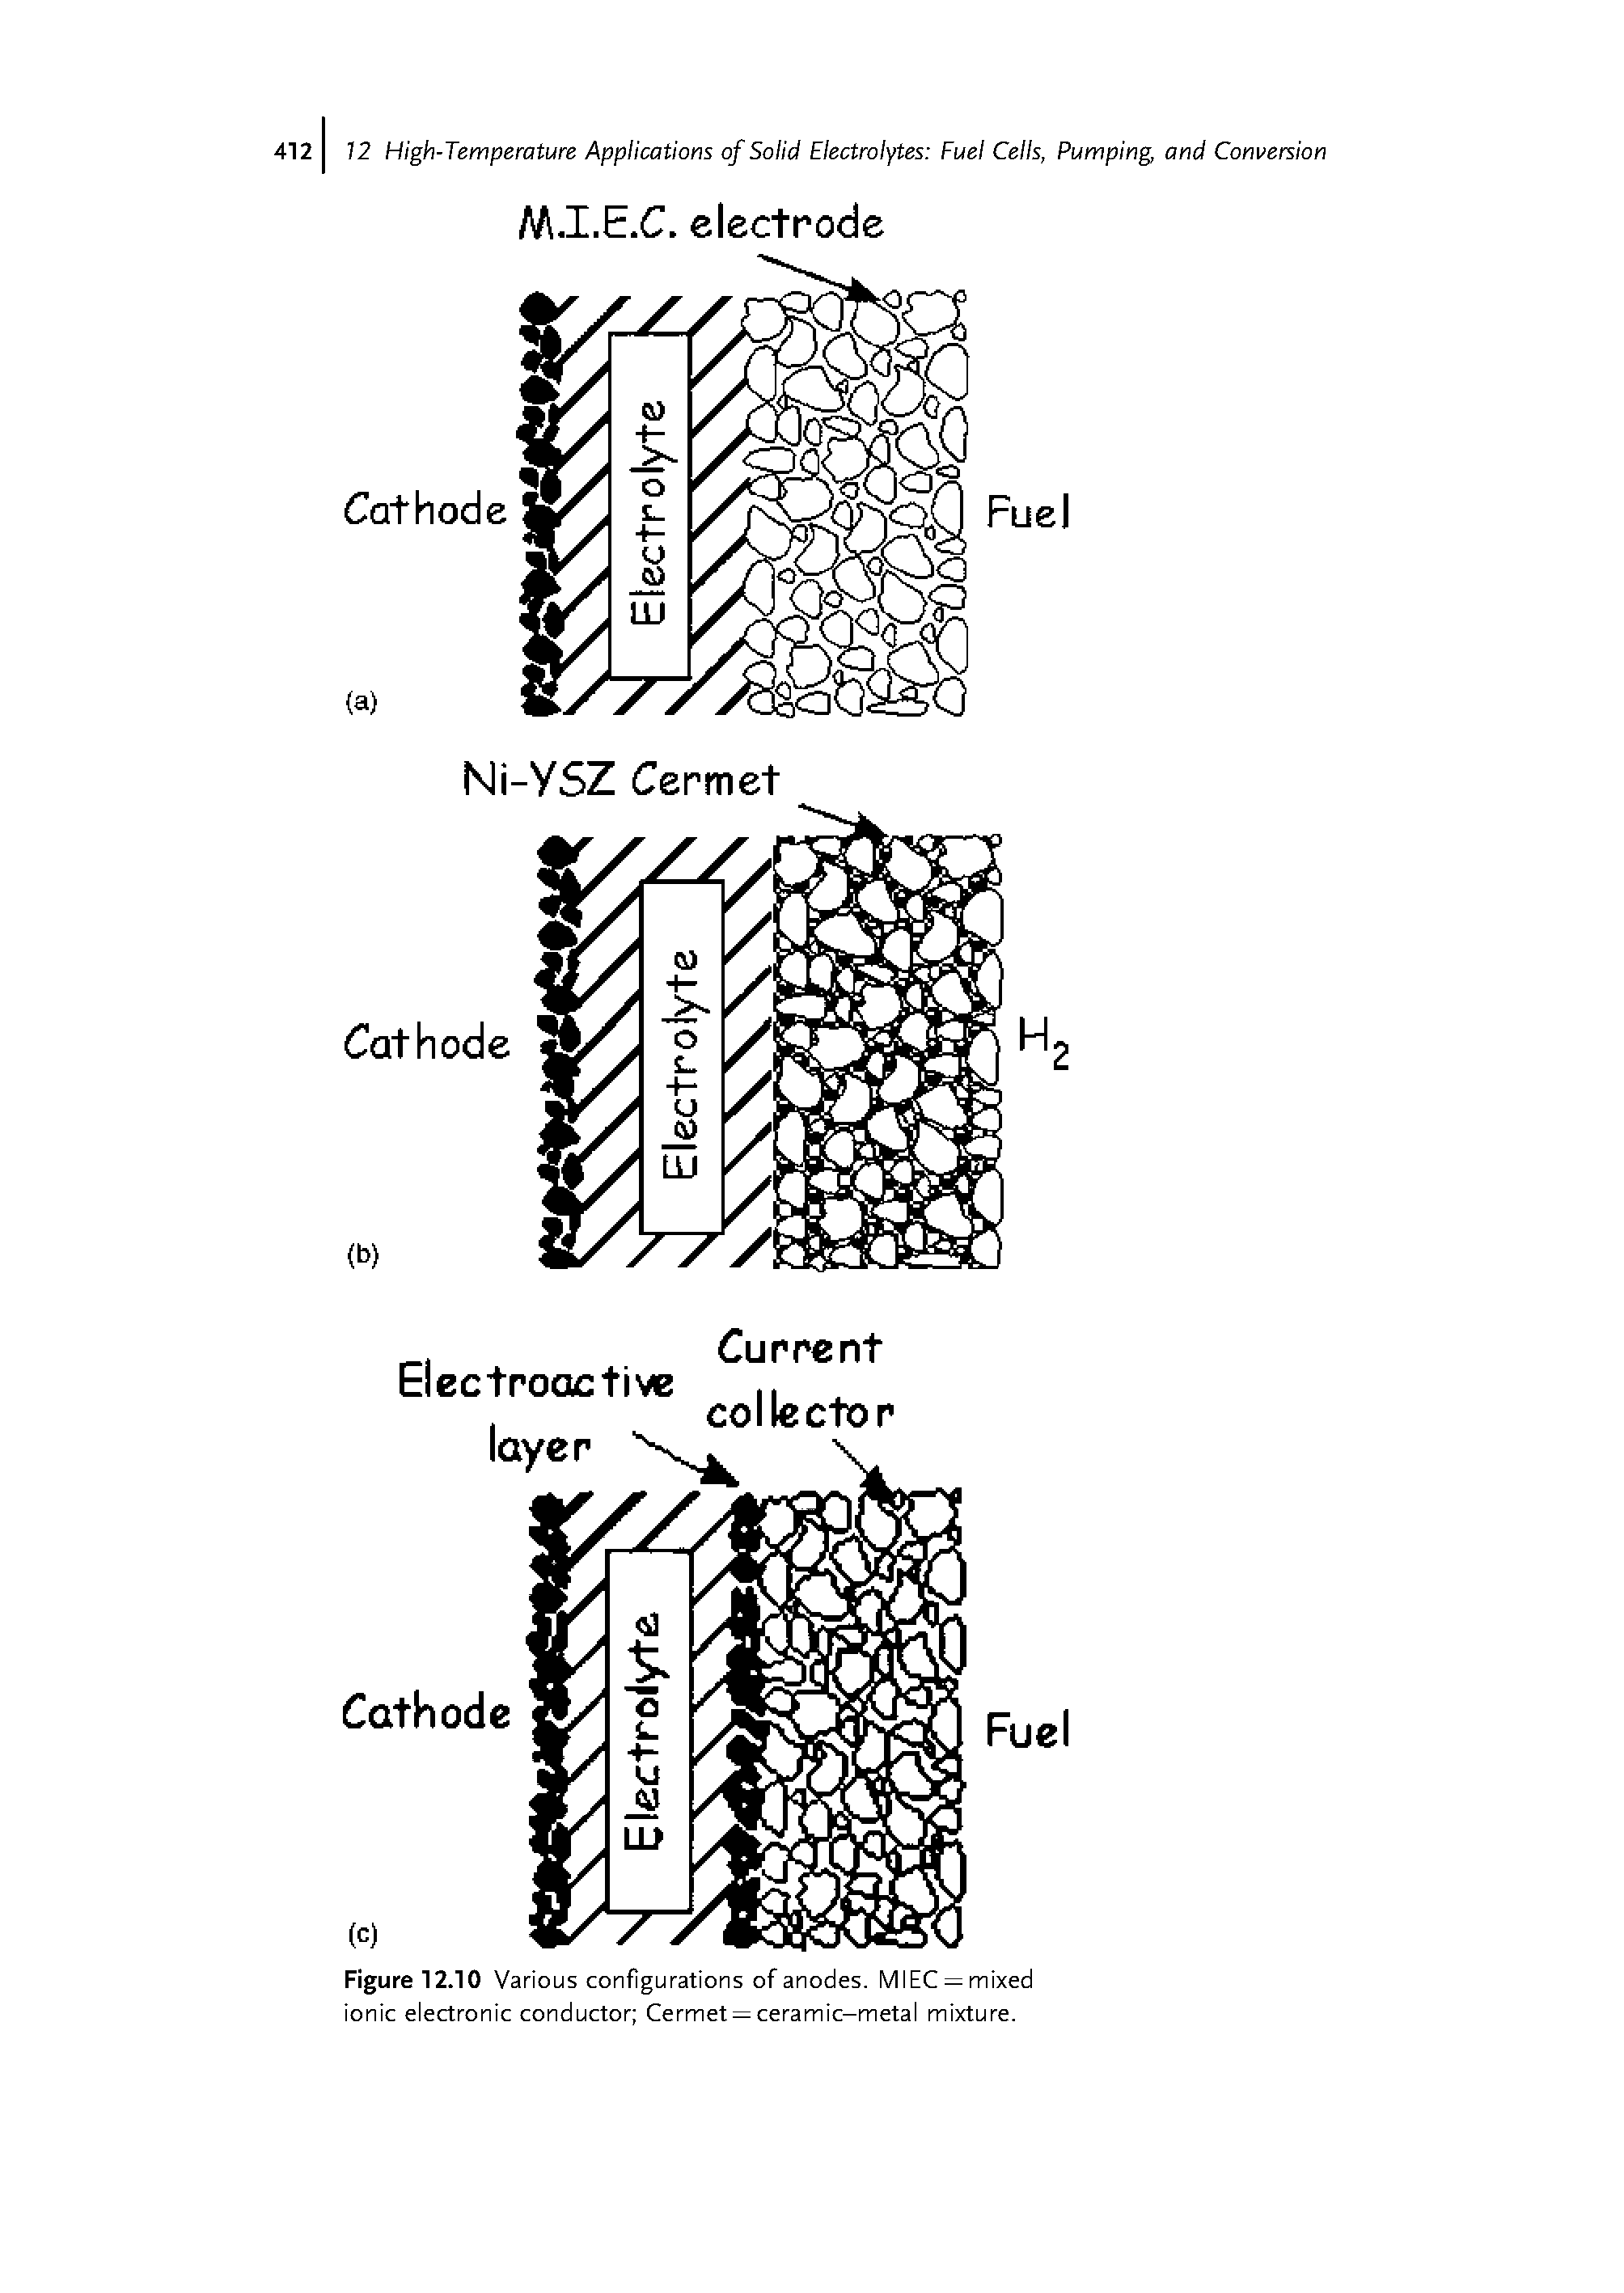 Figure 12.10 Various configurations of anodes. MIEC = mixed ionic electronic conductor Cermet — ceramic-metal mixture.